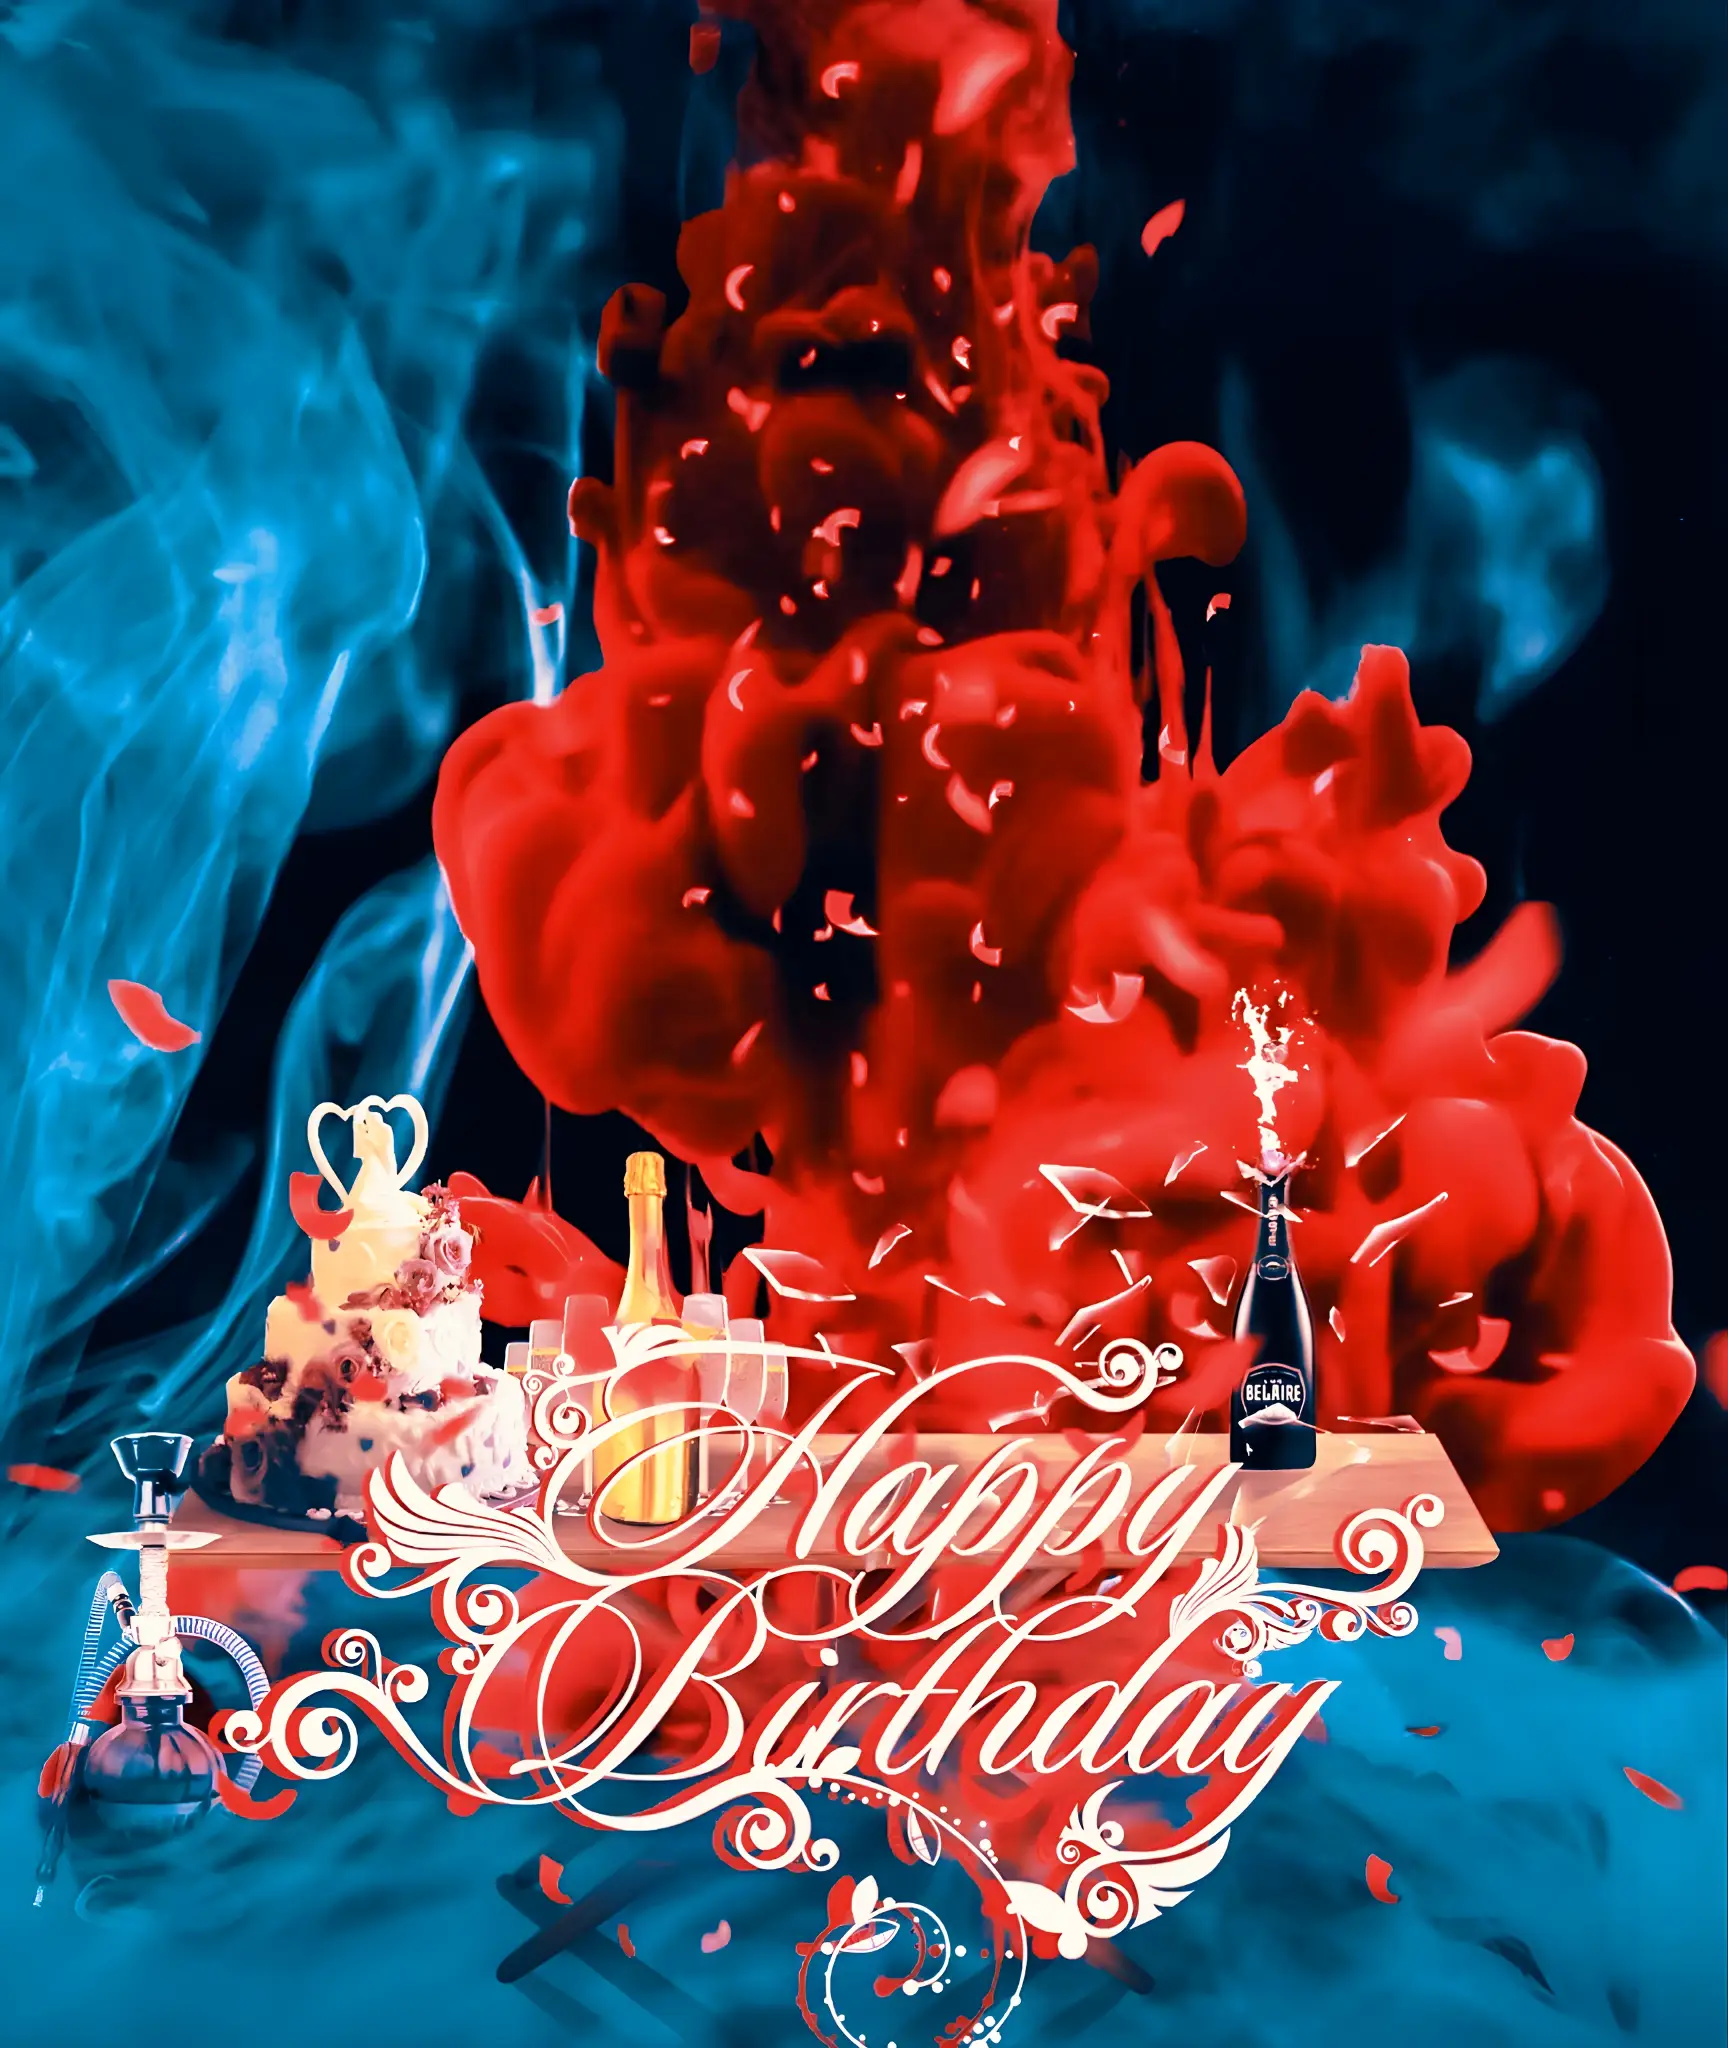 You are currently viewing Happy birthday party background download hd